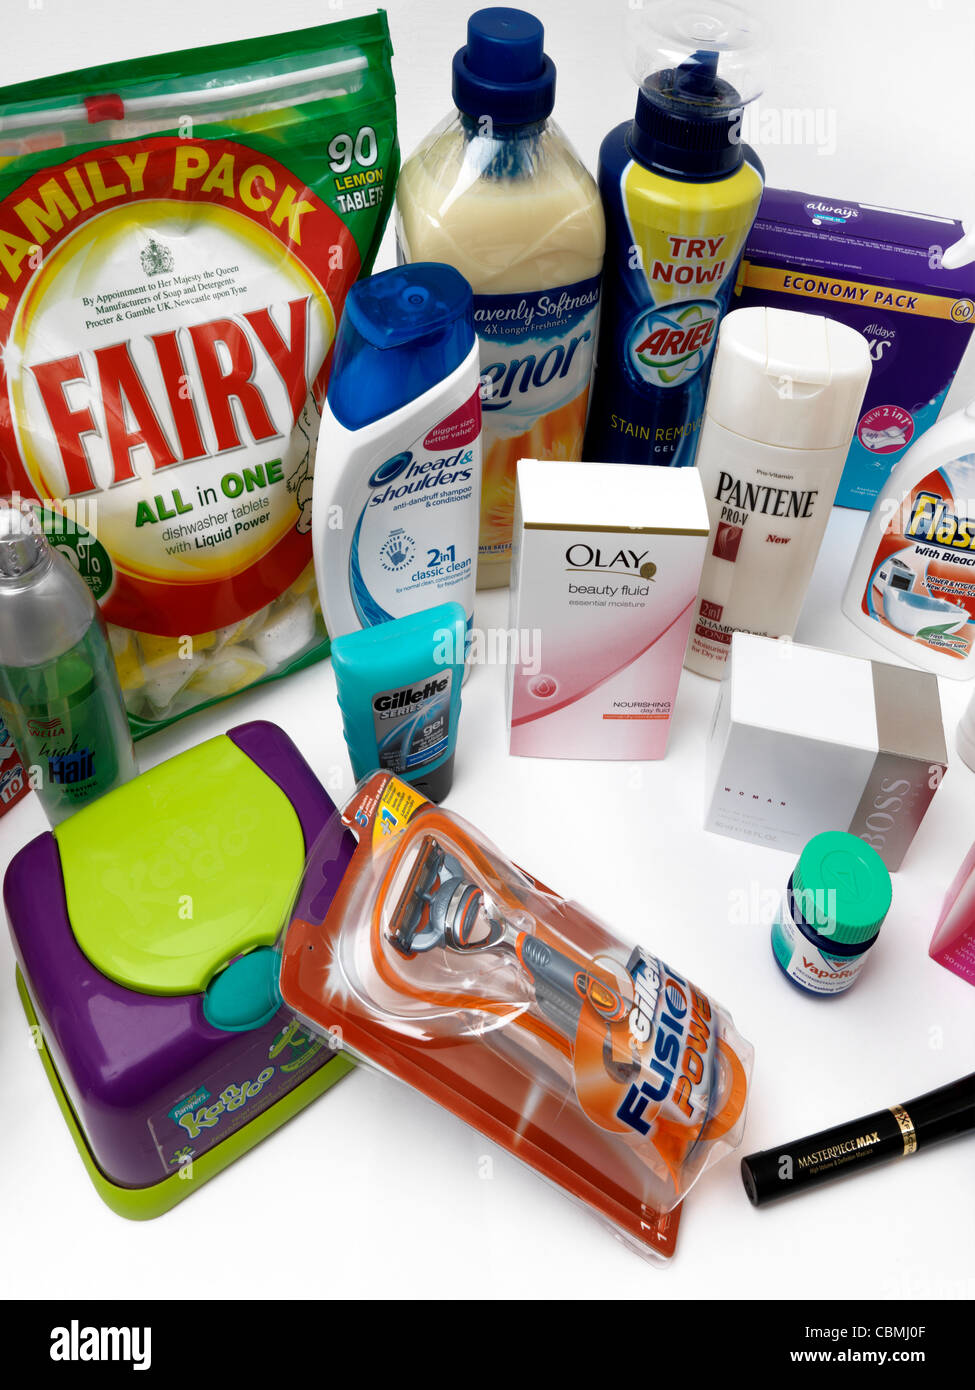 A Collection Of Procter And Gamble Products Stock Photo